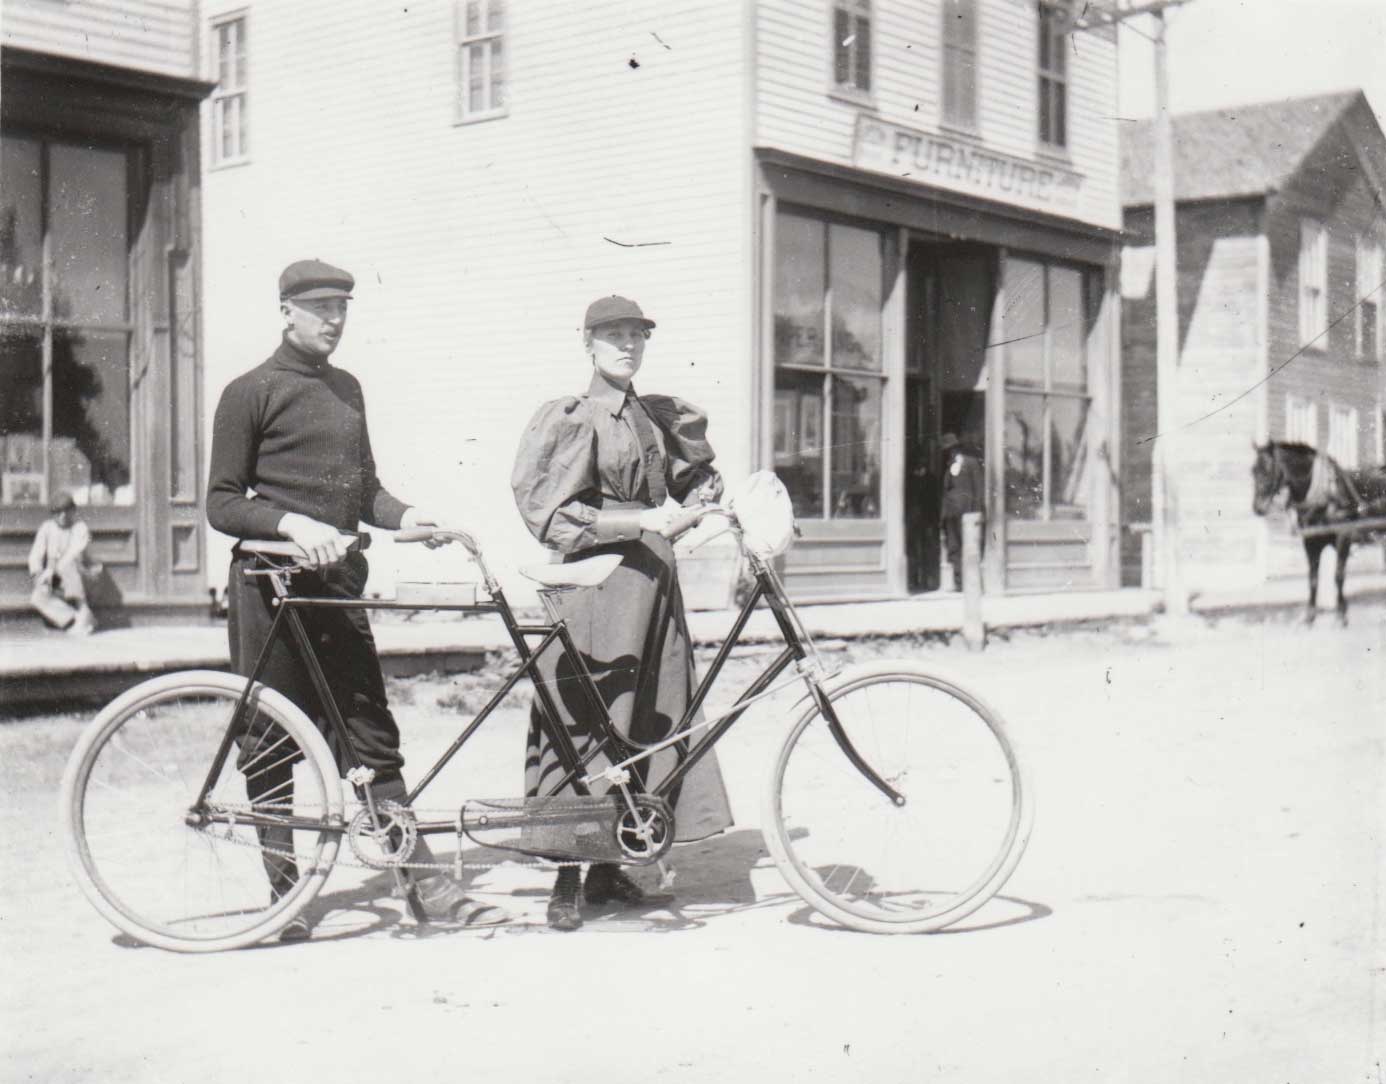 2. Bicycle Built for Two